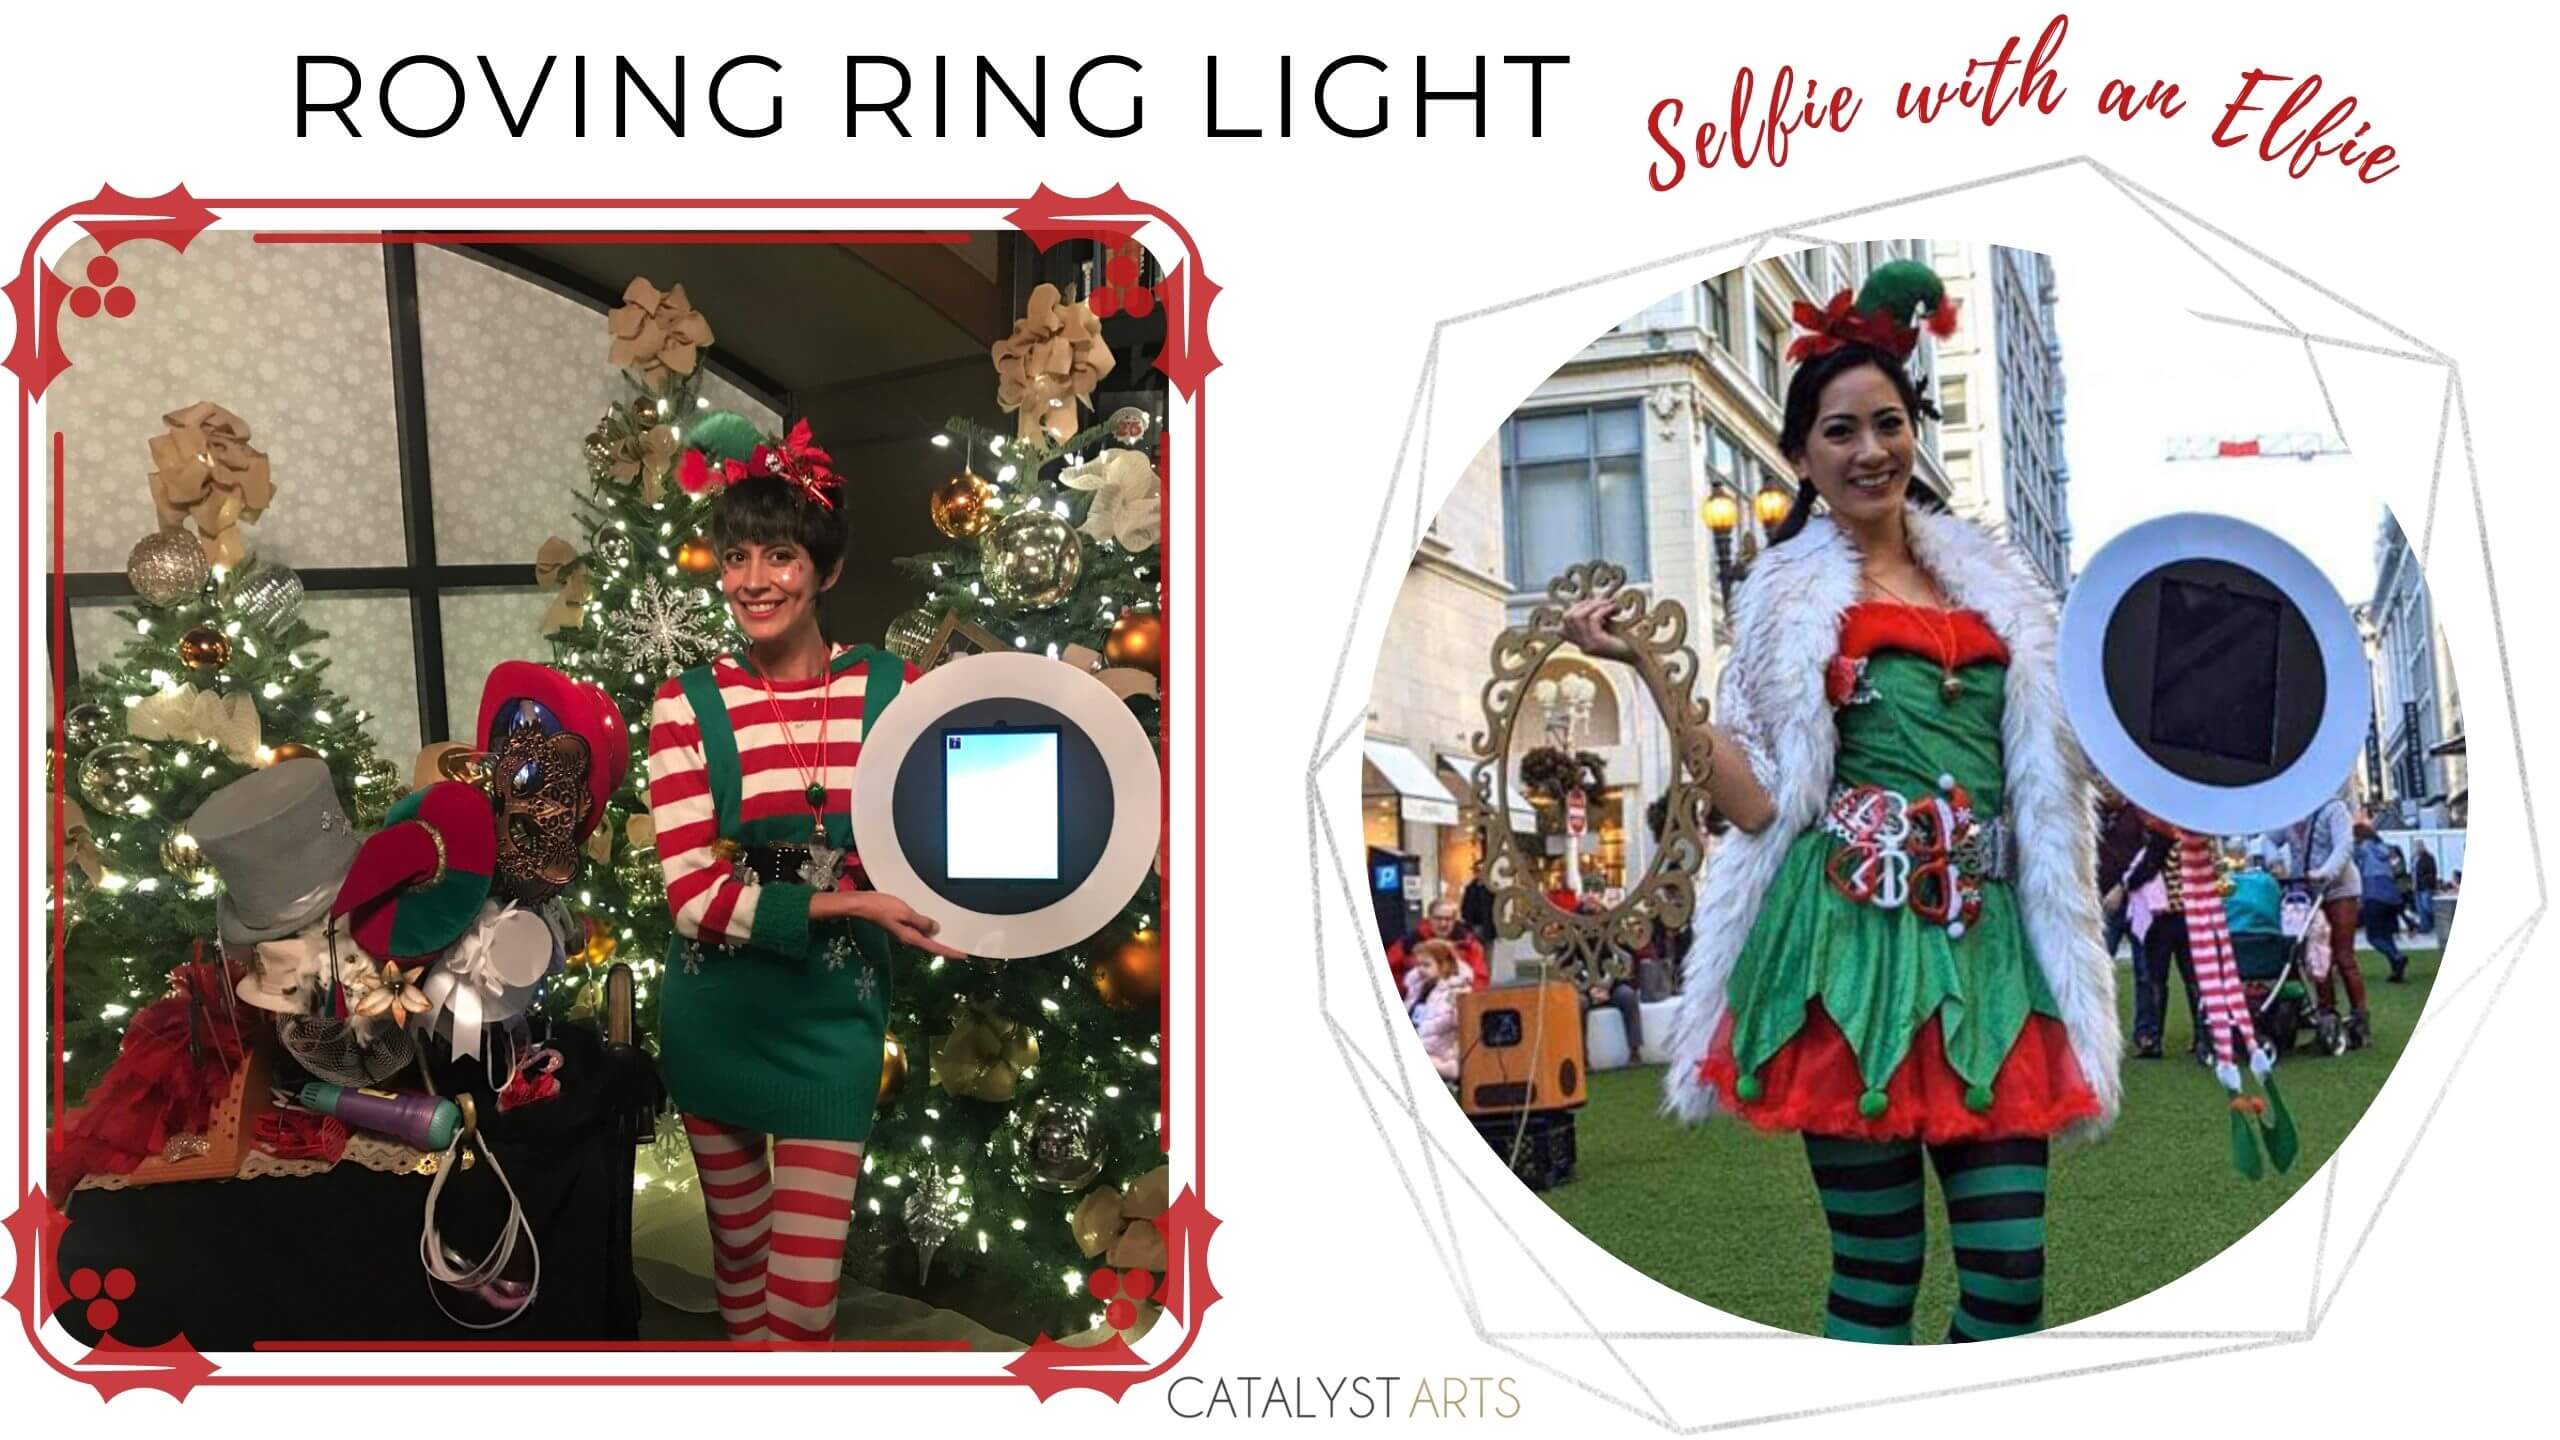 Roving Ring Light mobile photo booth + Selfie with an Elfie by Catalyst Arts